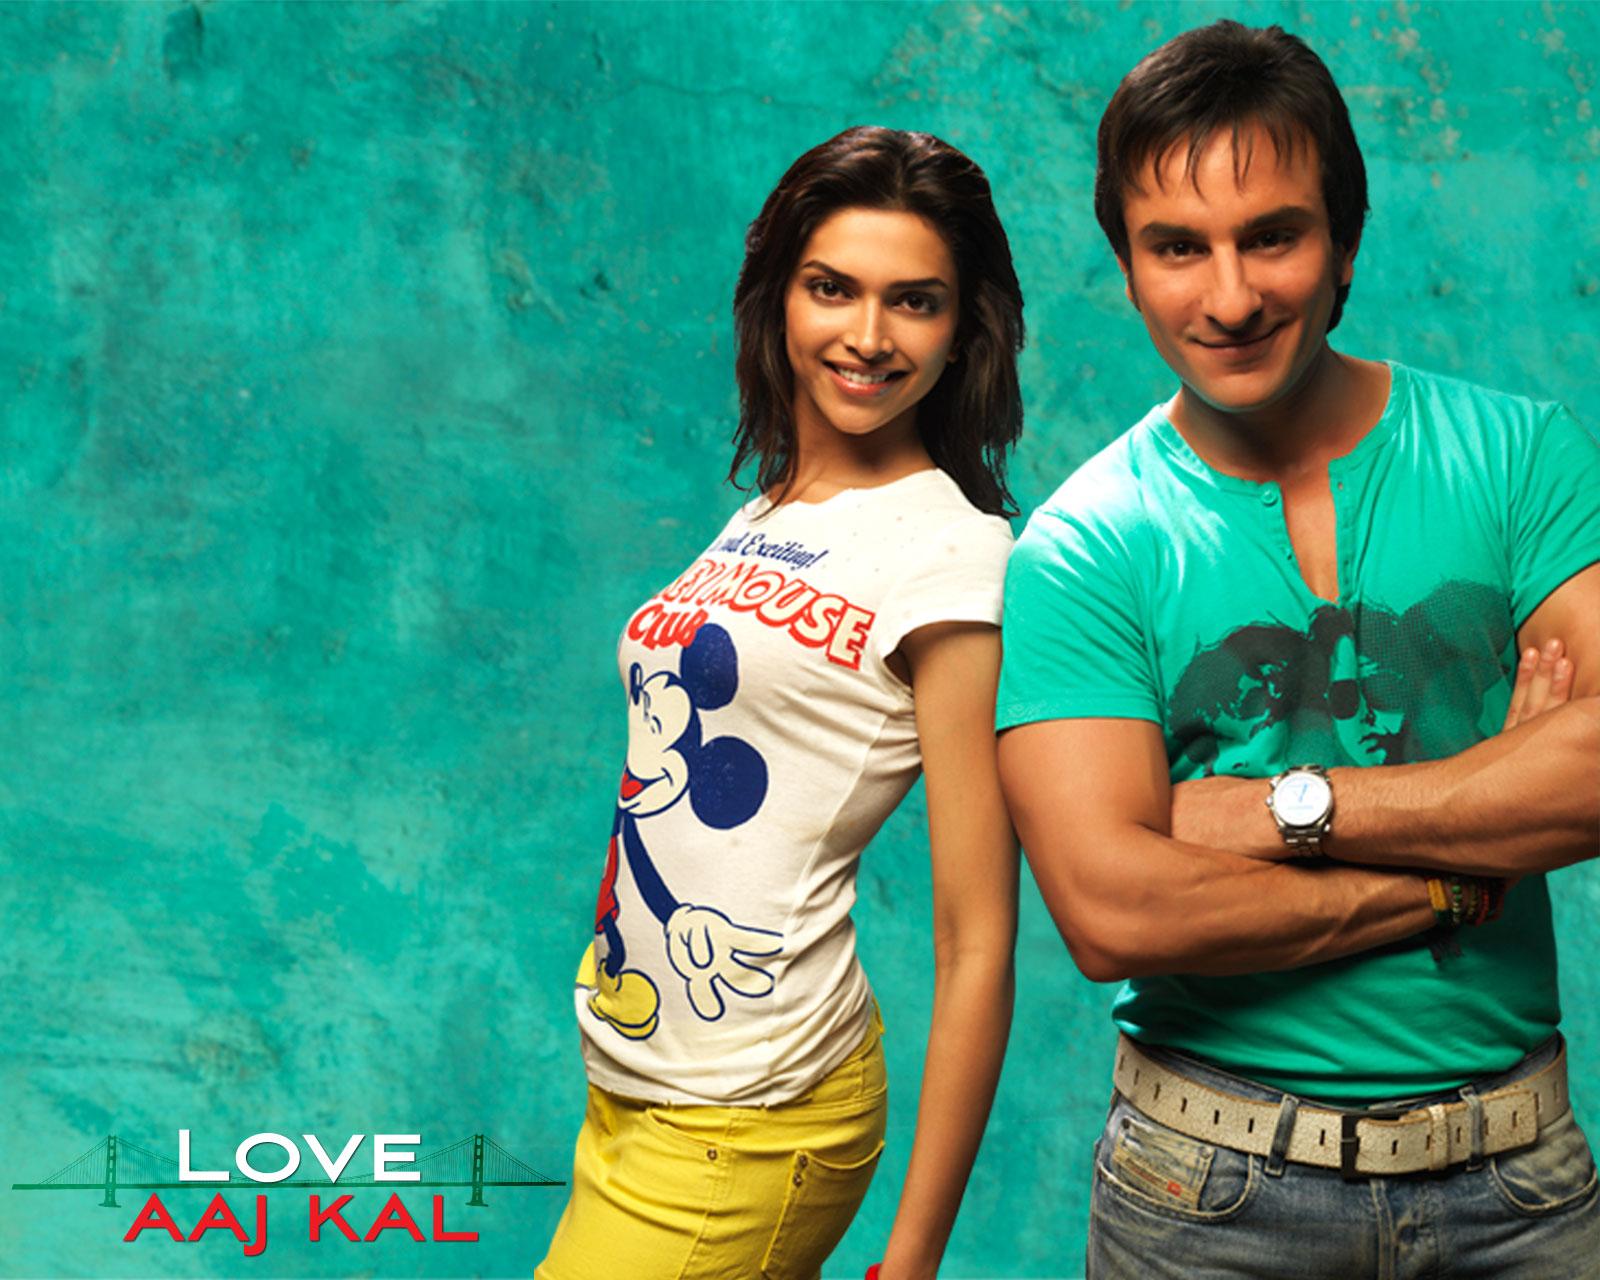 In Love Aaj Kal, Saif's wardrobe mirrored the complexities of love and relationships.